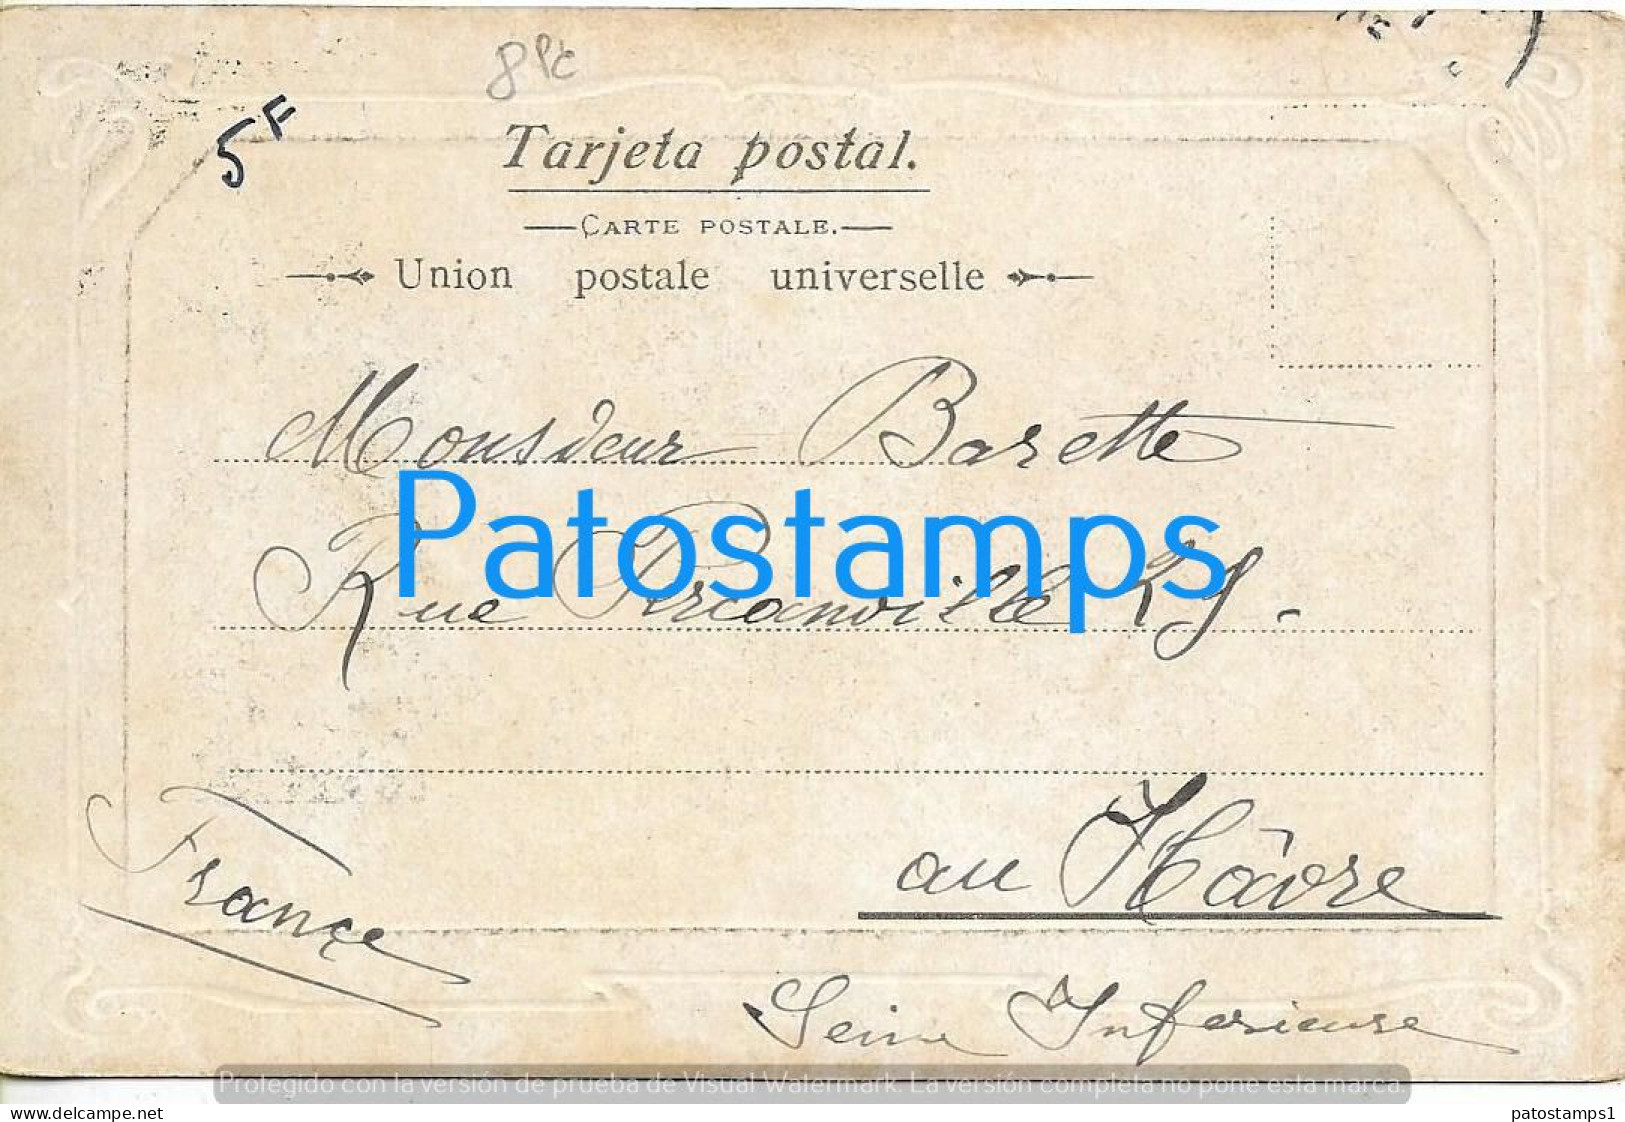 227388 ARGENTINA BUENOS AIRES DEPARTAMENTO CENTRAL DE POLICIA POLICE SPOTTED CIRCULATED TO FRANCE  POSTAL POSTCARD - Argentine